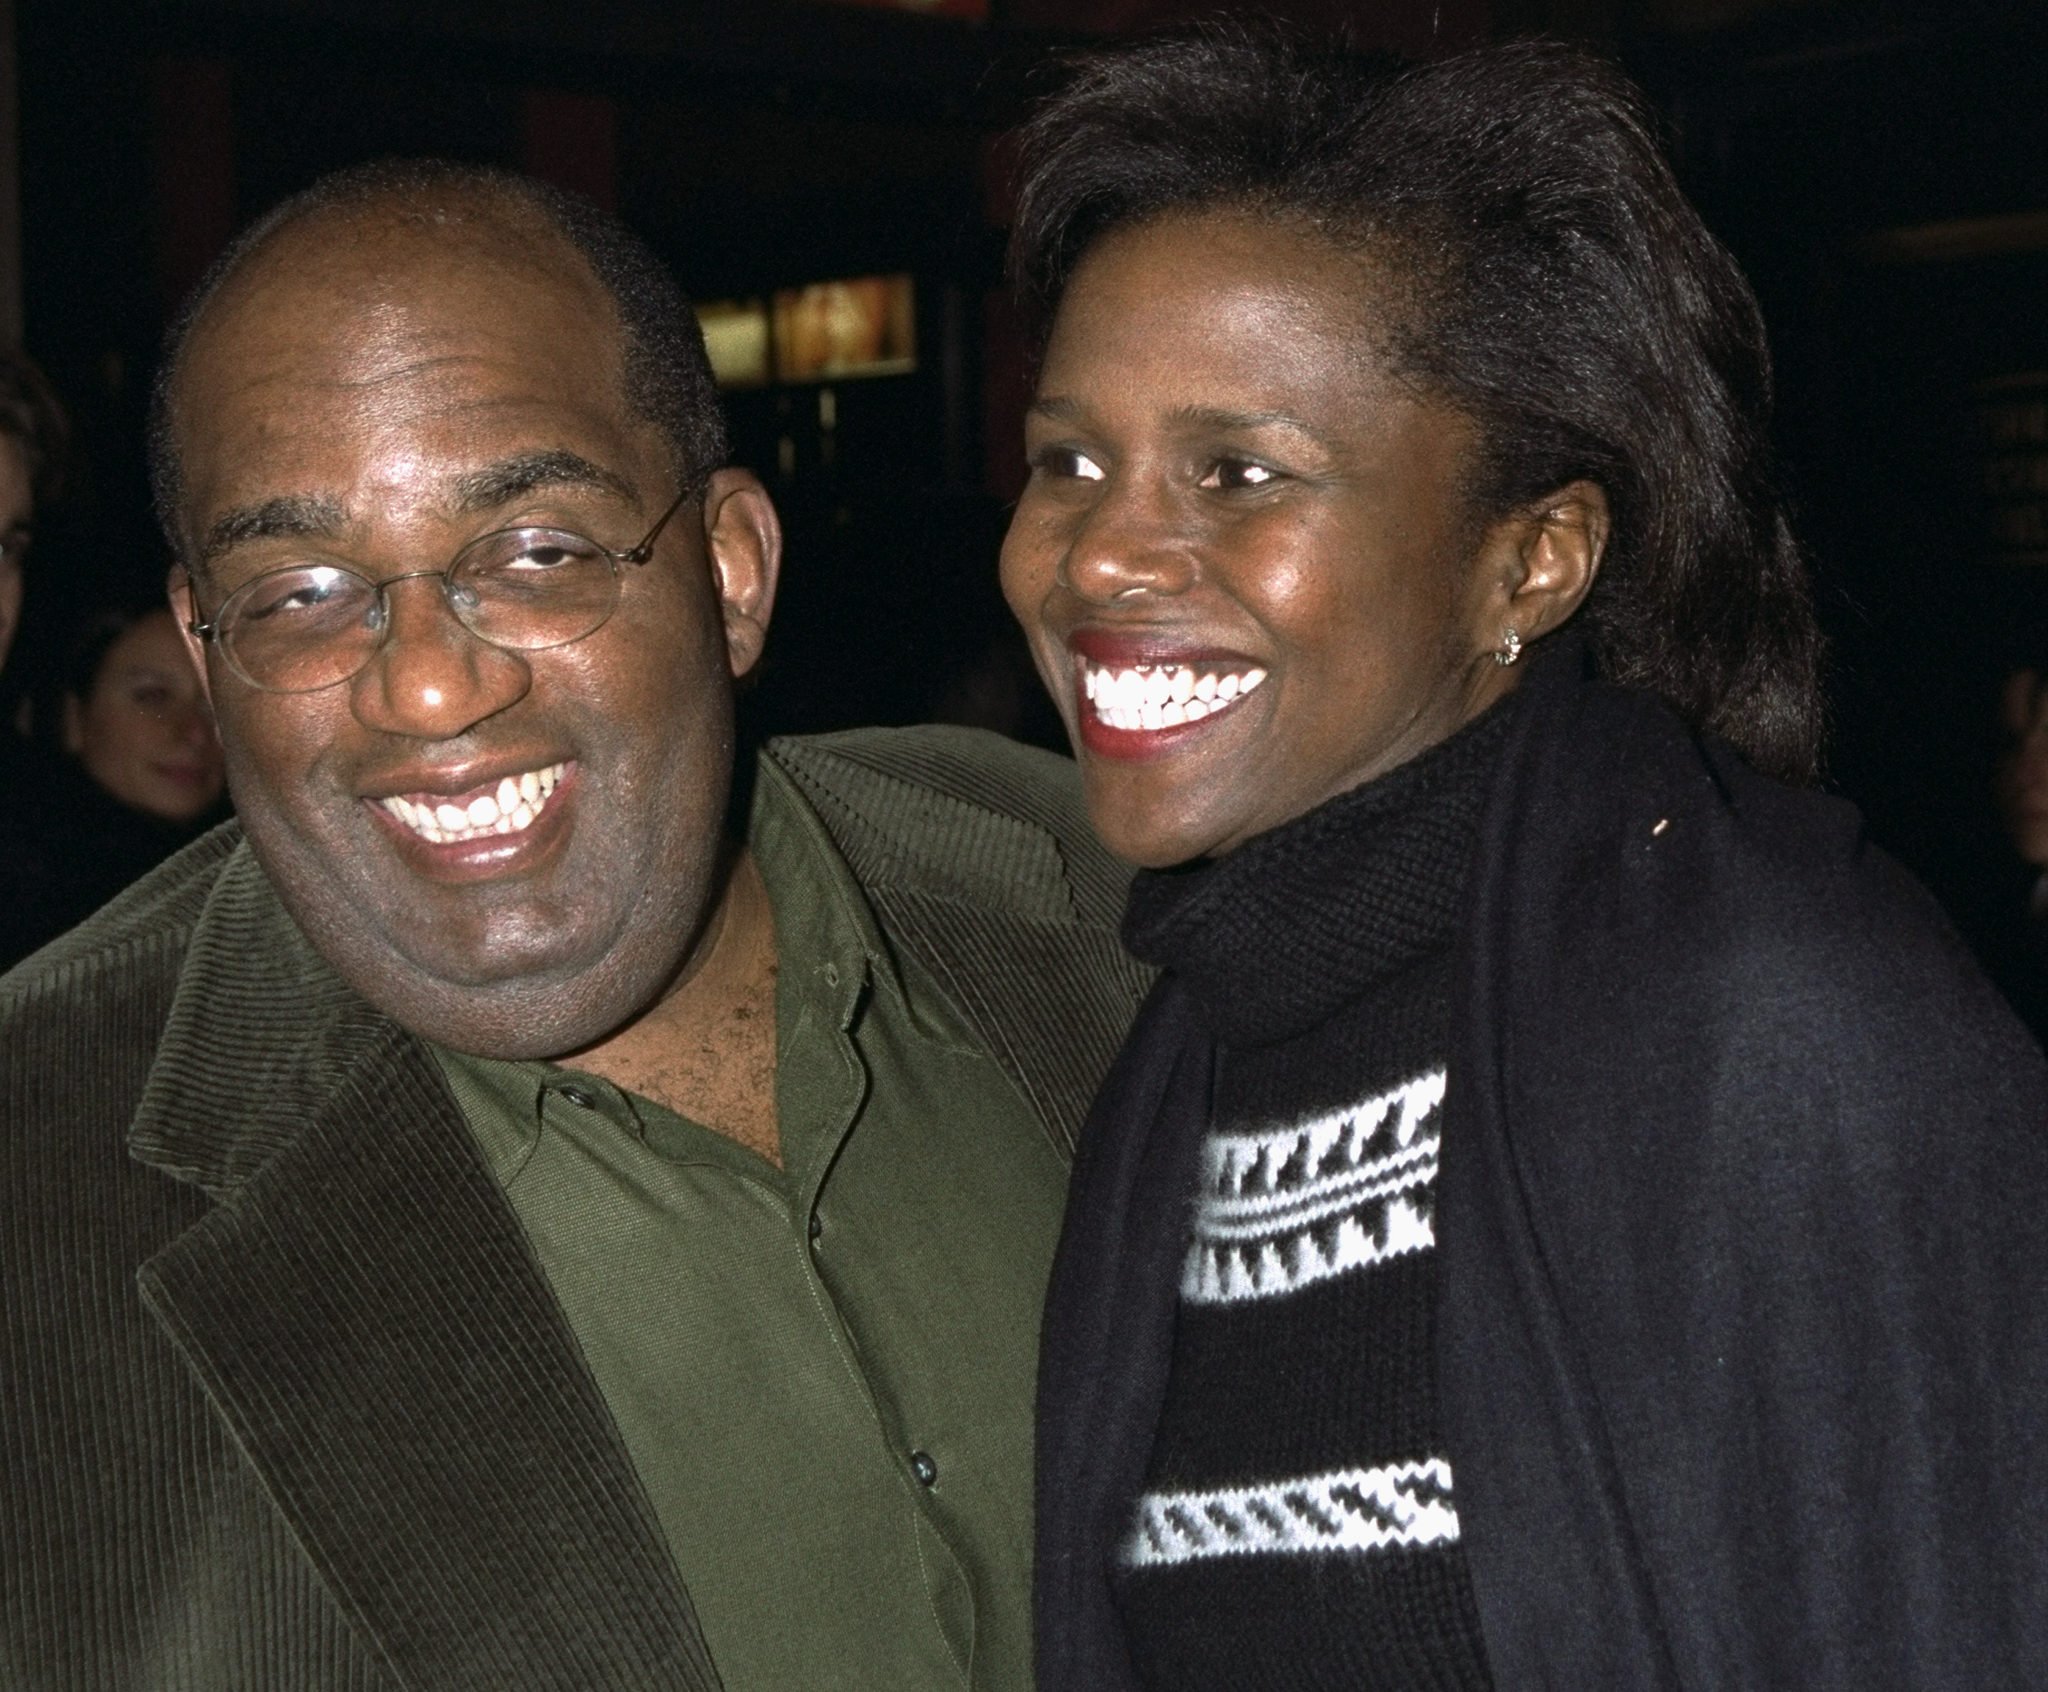 Al Roker and Deborah Roberts at the movie premiere "The rules of the cider house" November 15, 1999. |  Source: Getty Images